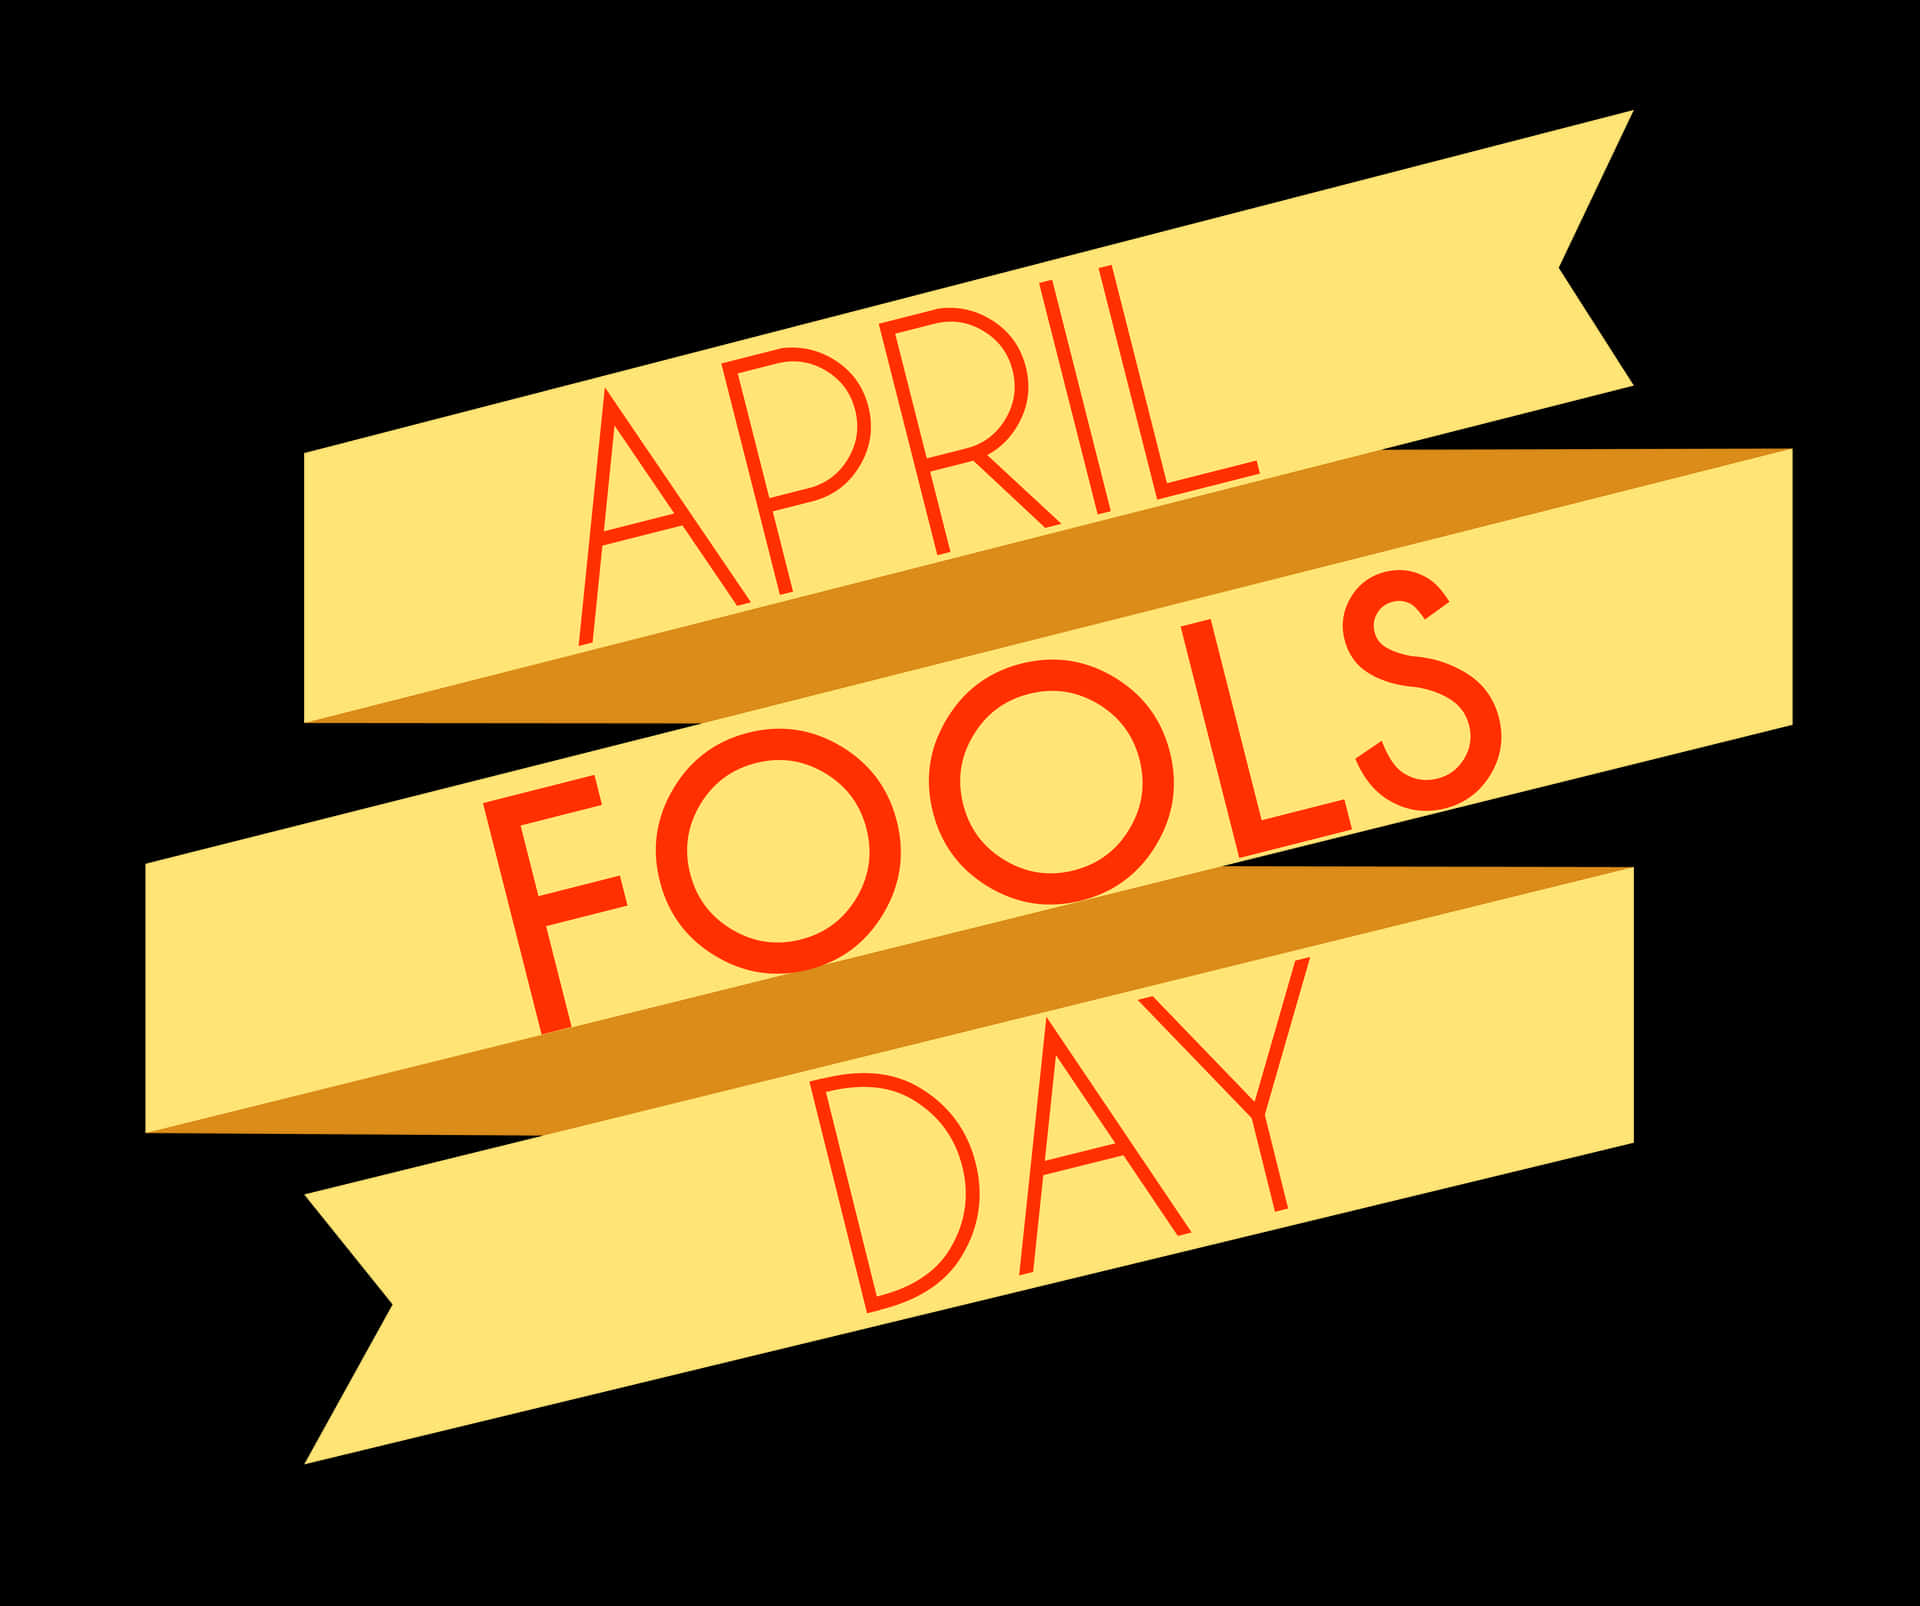 Make Sure to Double-Check your Pranks this April Fools'!